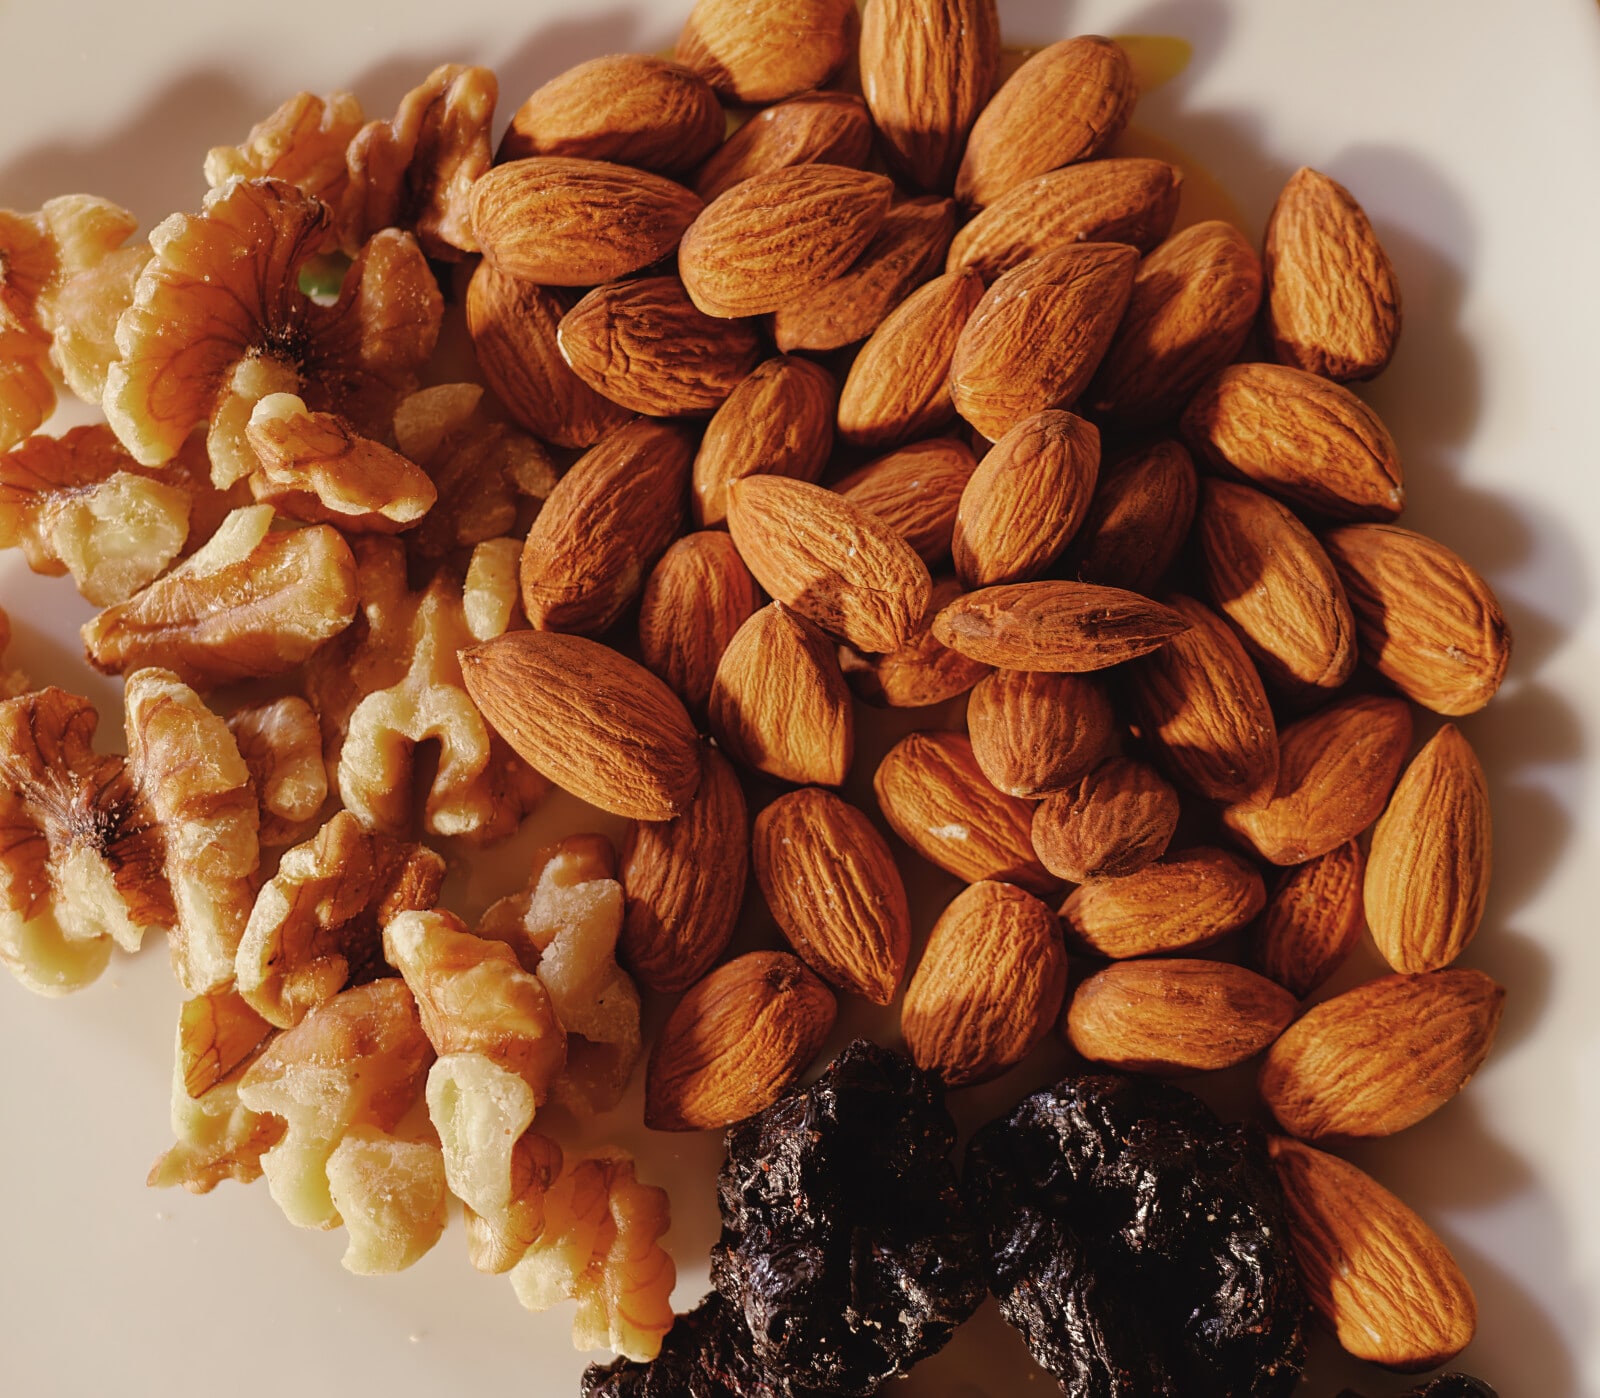 Various types of nuts that are high in magnesium